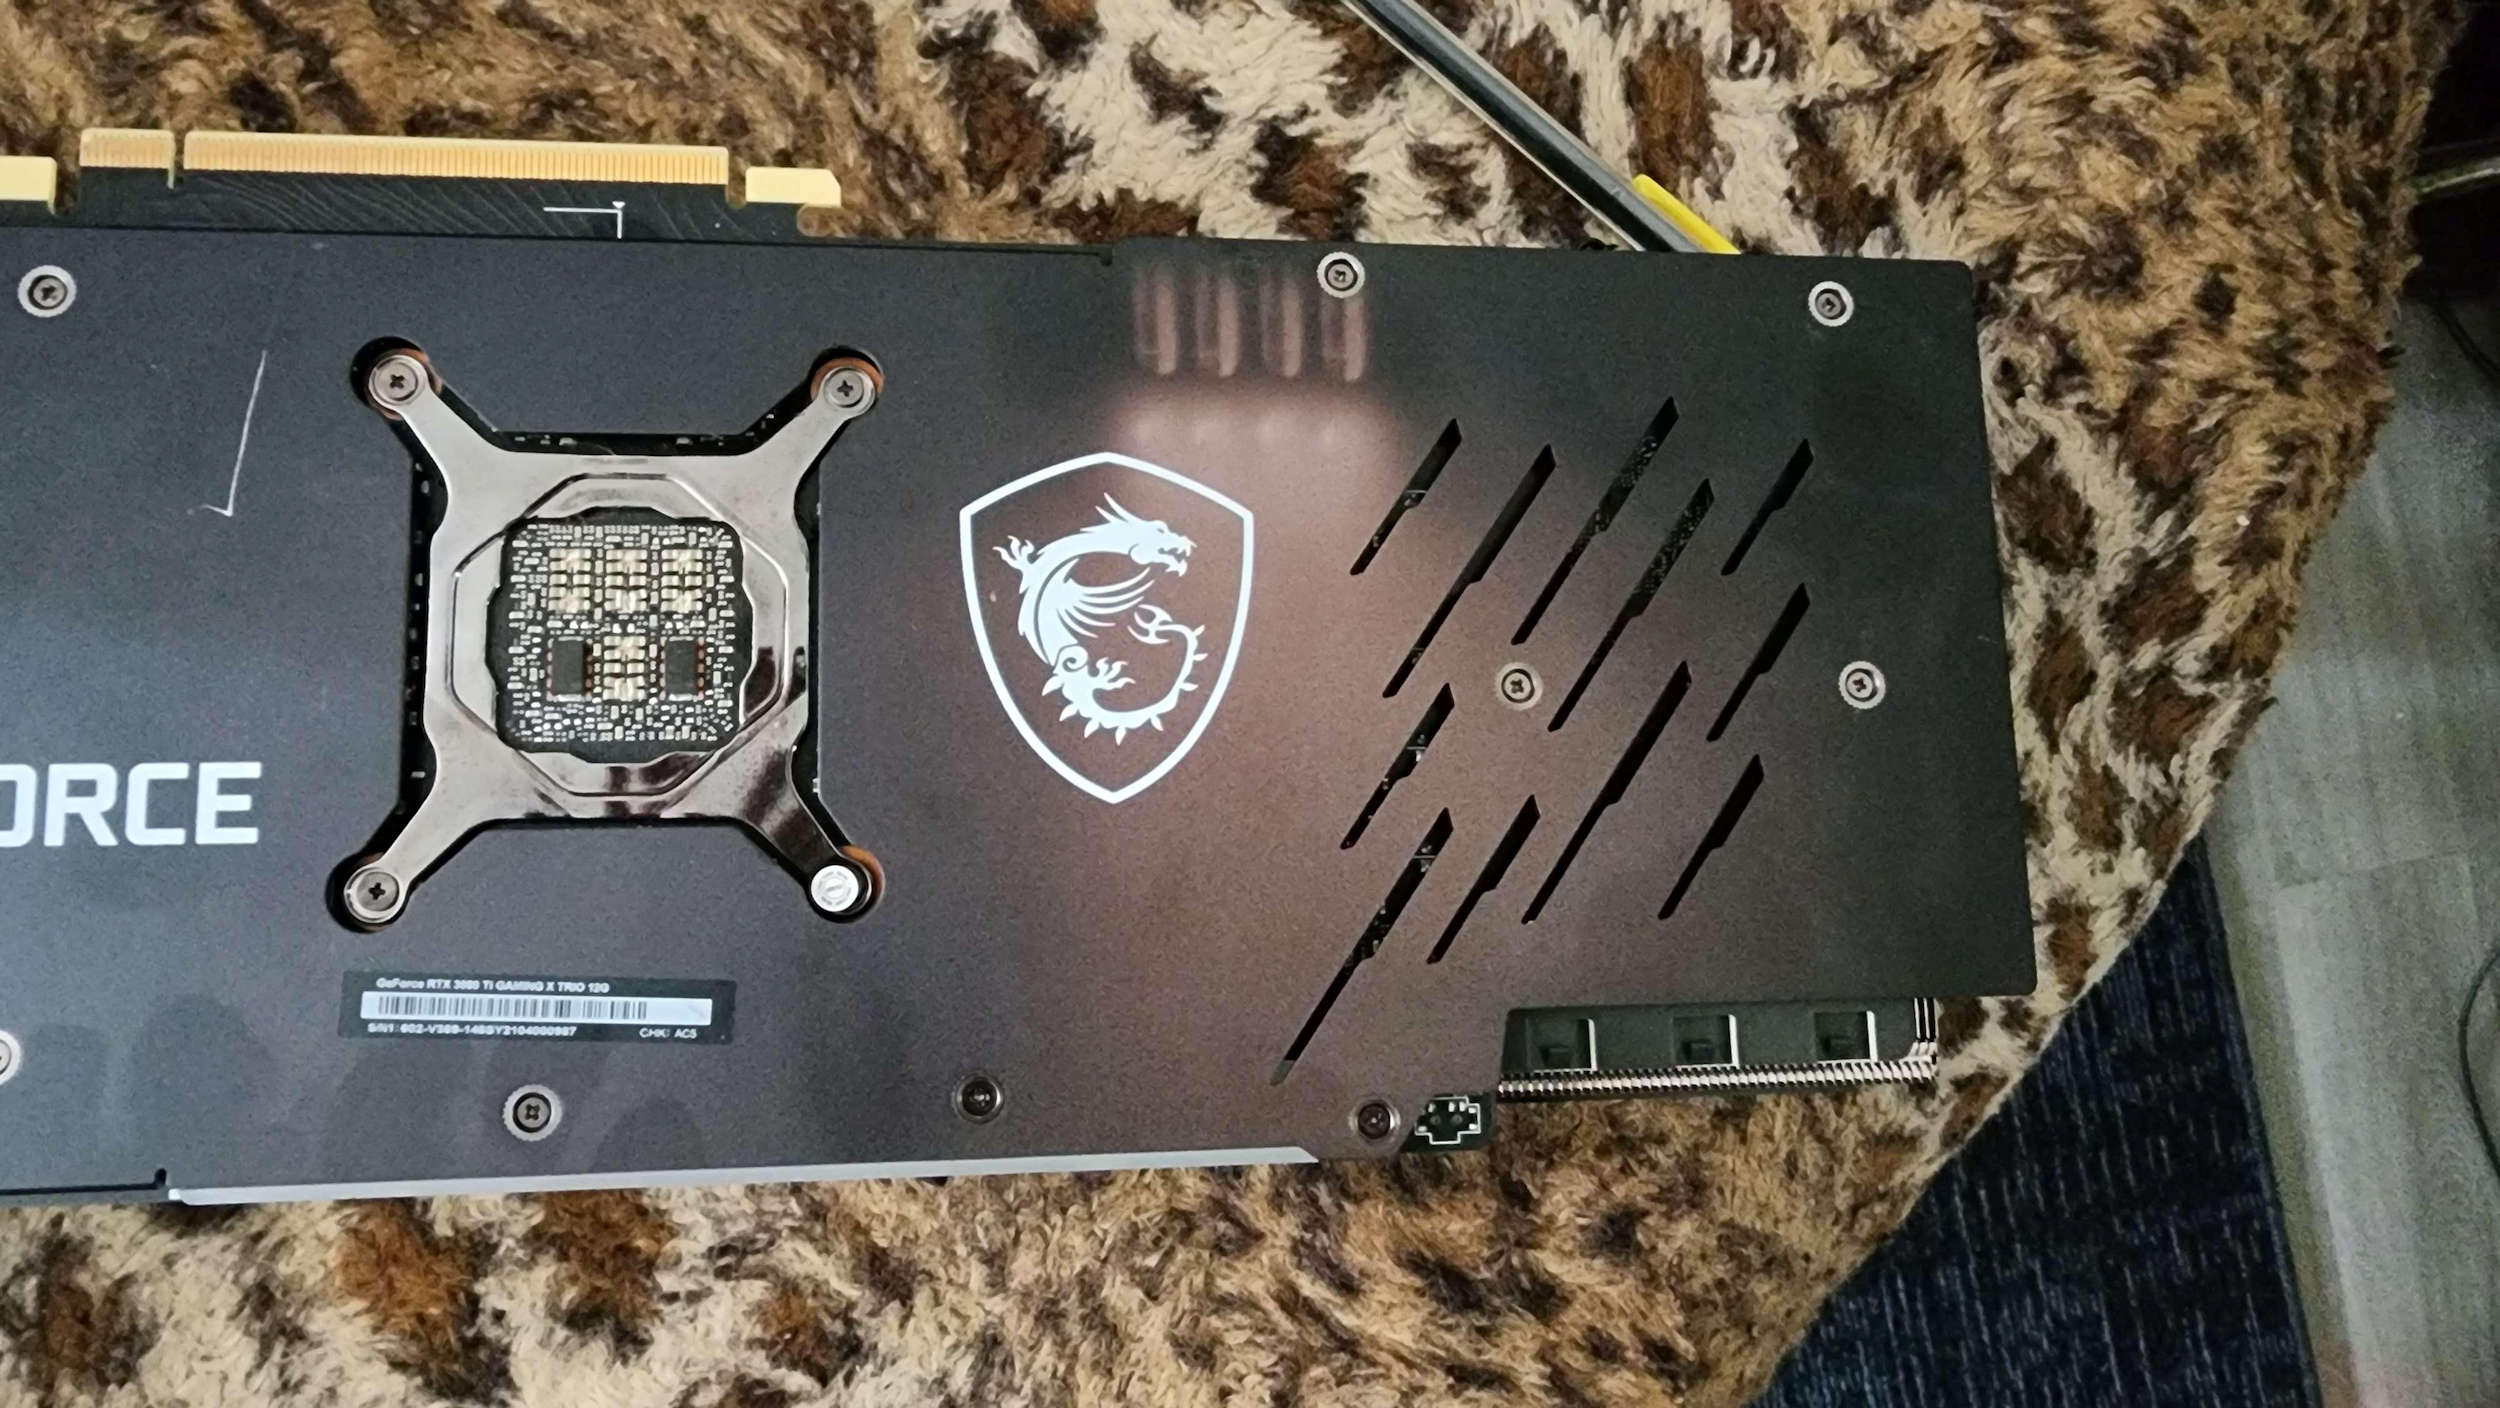 It's not just OLEDs that can suffer from burn in. Your graphics card's backplate might suffer from it too